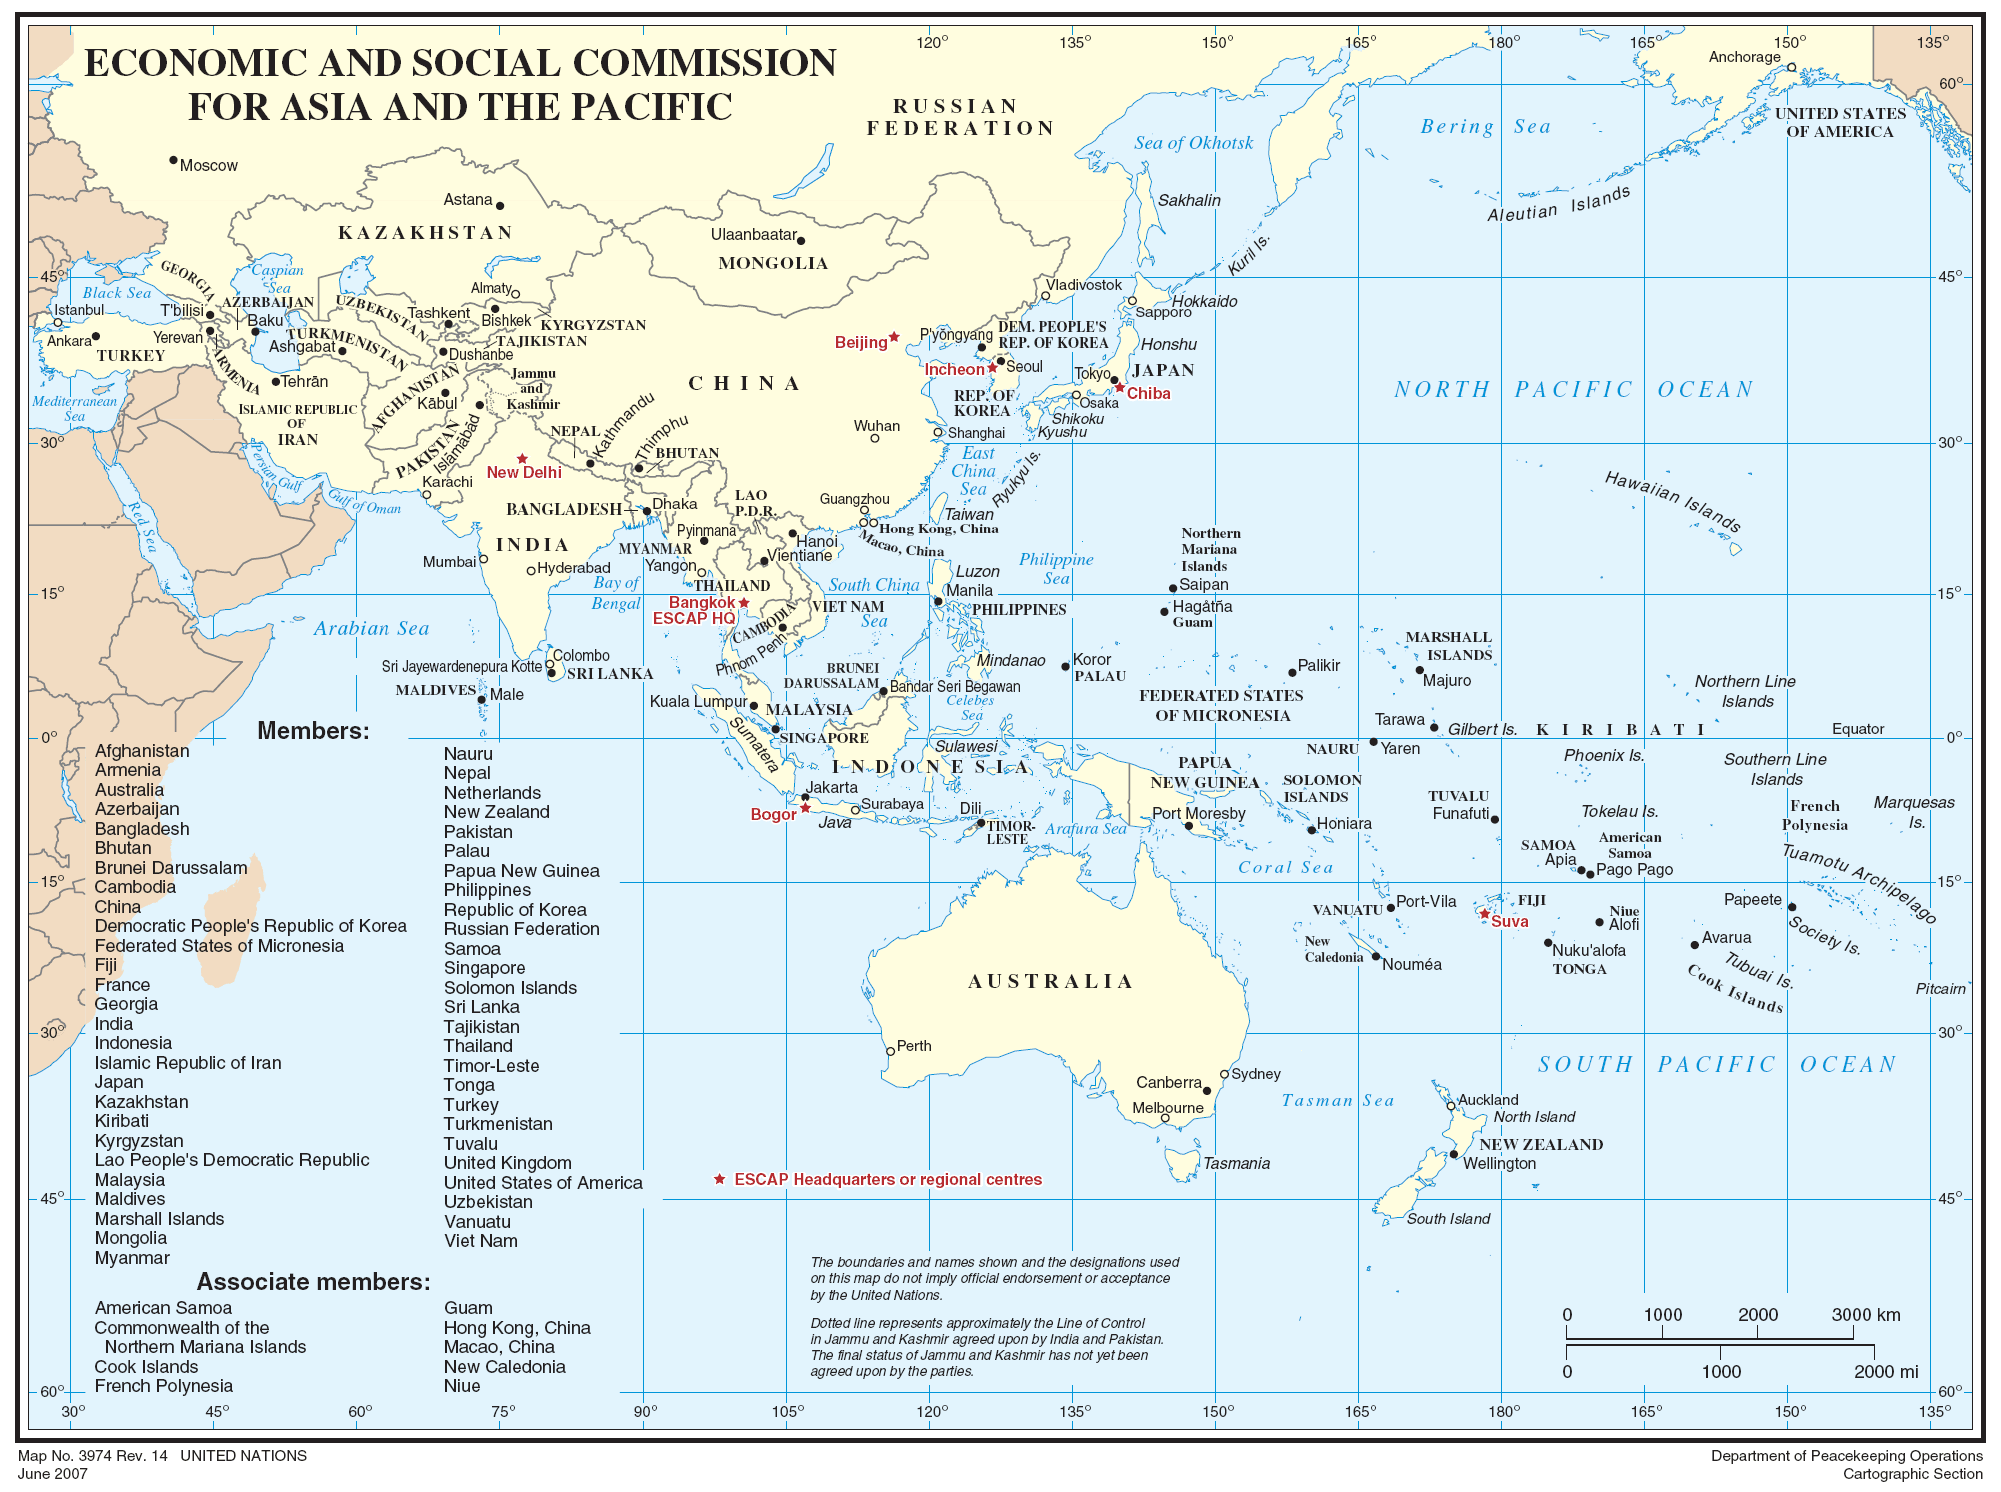 Map of states in Asia and Pacific Ocean region